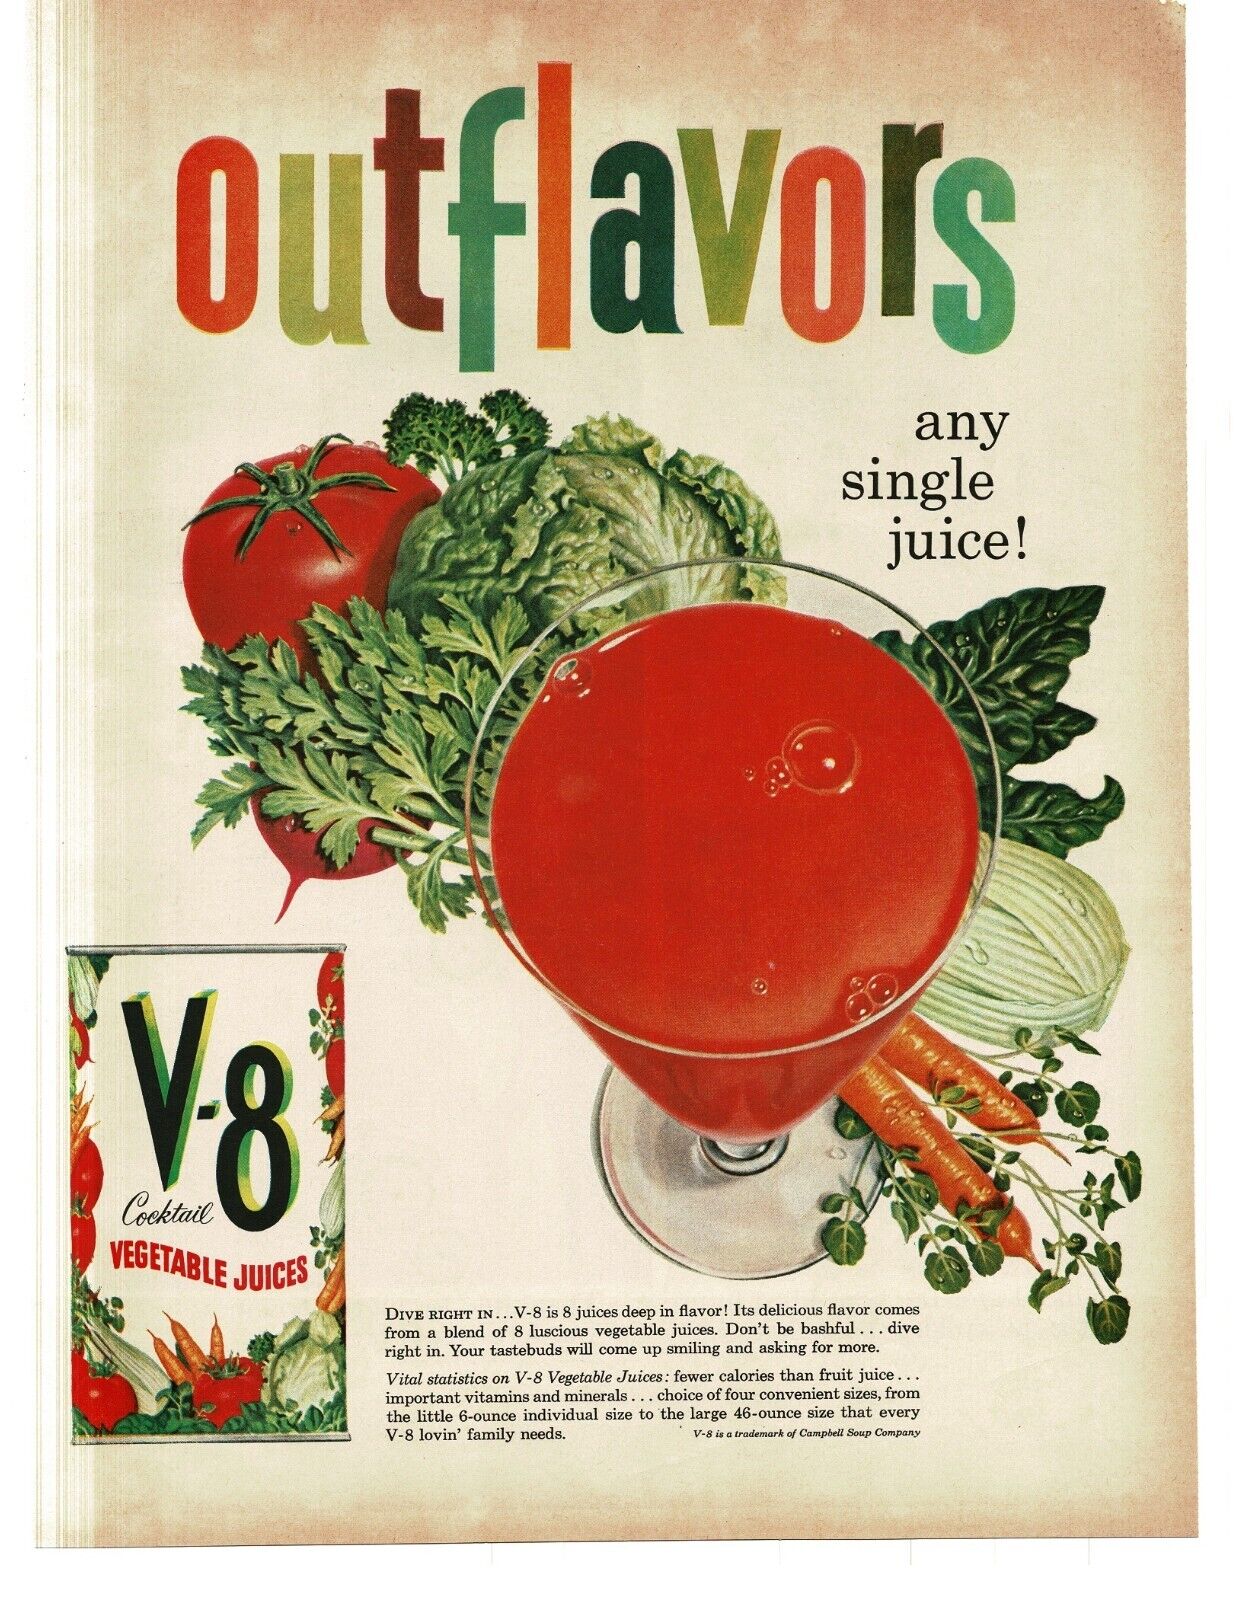 A vintage ad by John C Howard for V8 juice, surpassing all other juice drink ads in flavor, from 1958